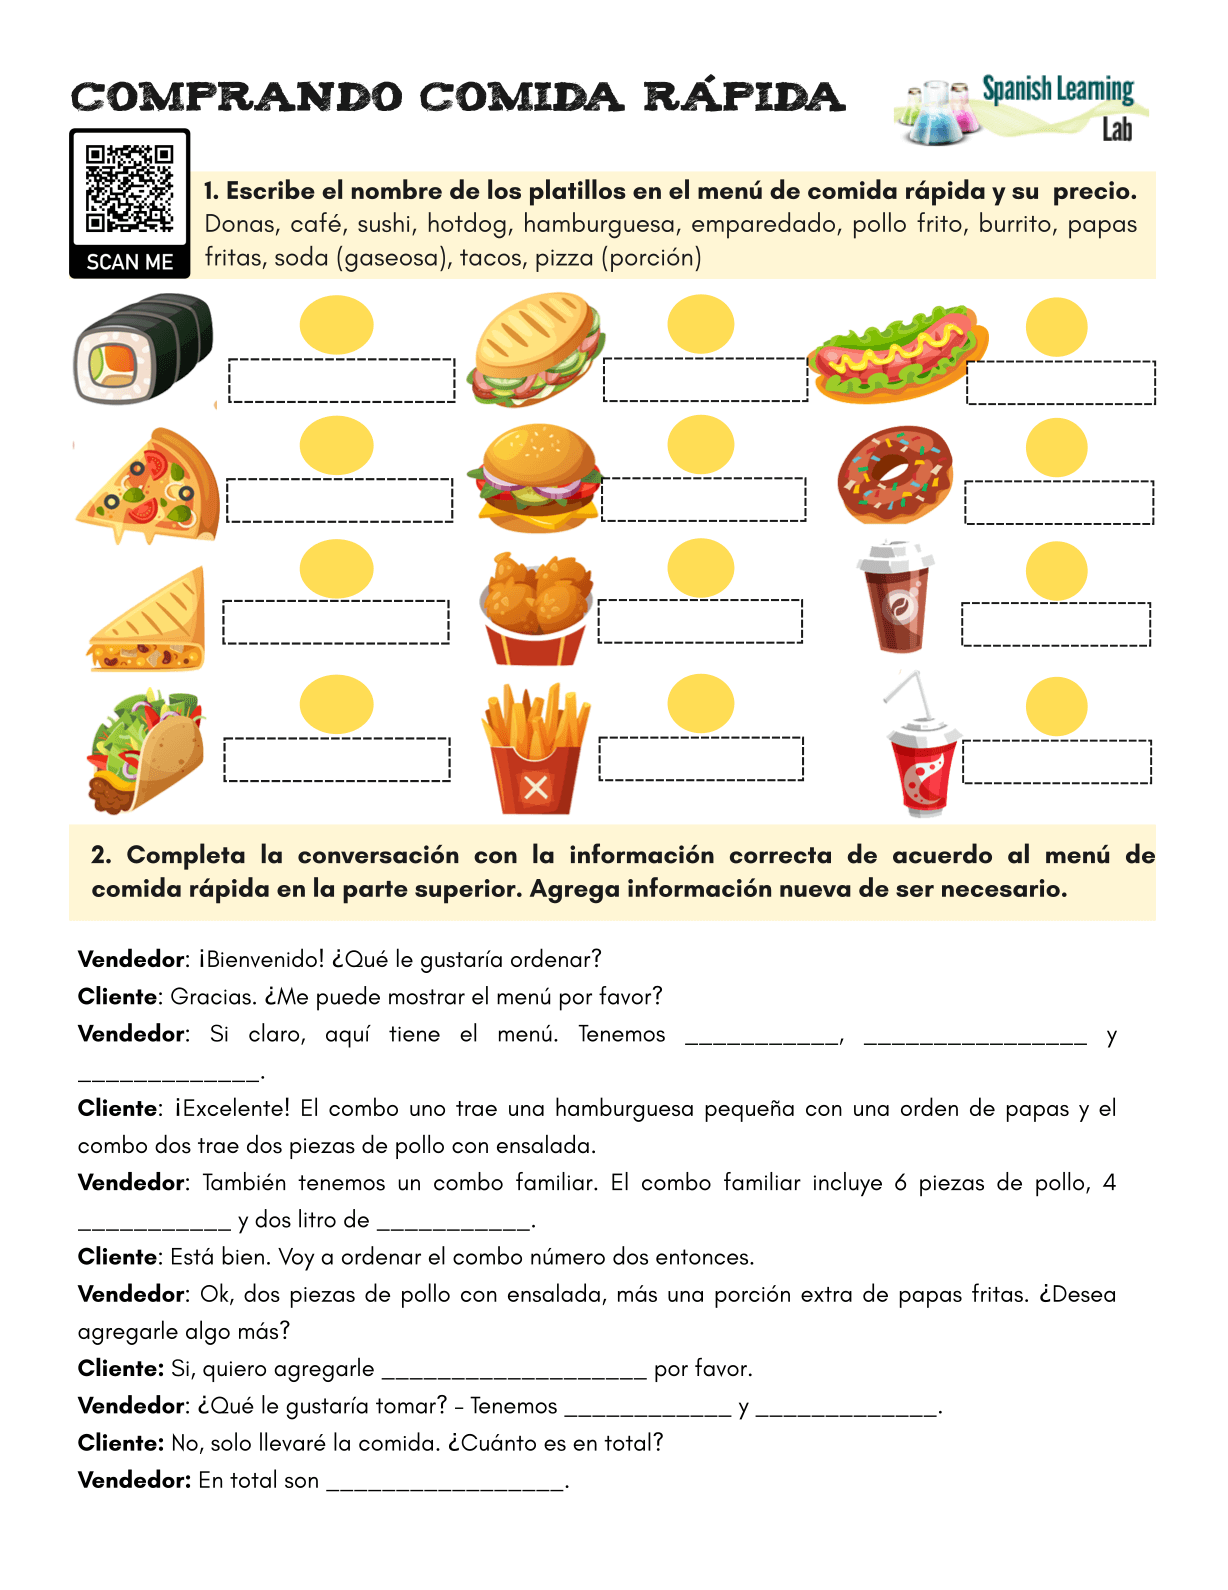 at-a-fast-food-restaurant-in-spanish-pdf-worksheet-spanish-learning-lab